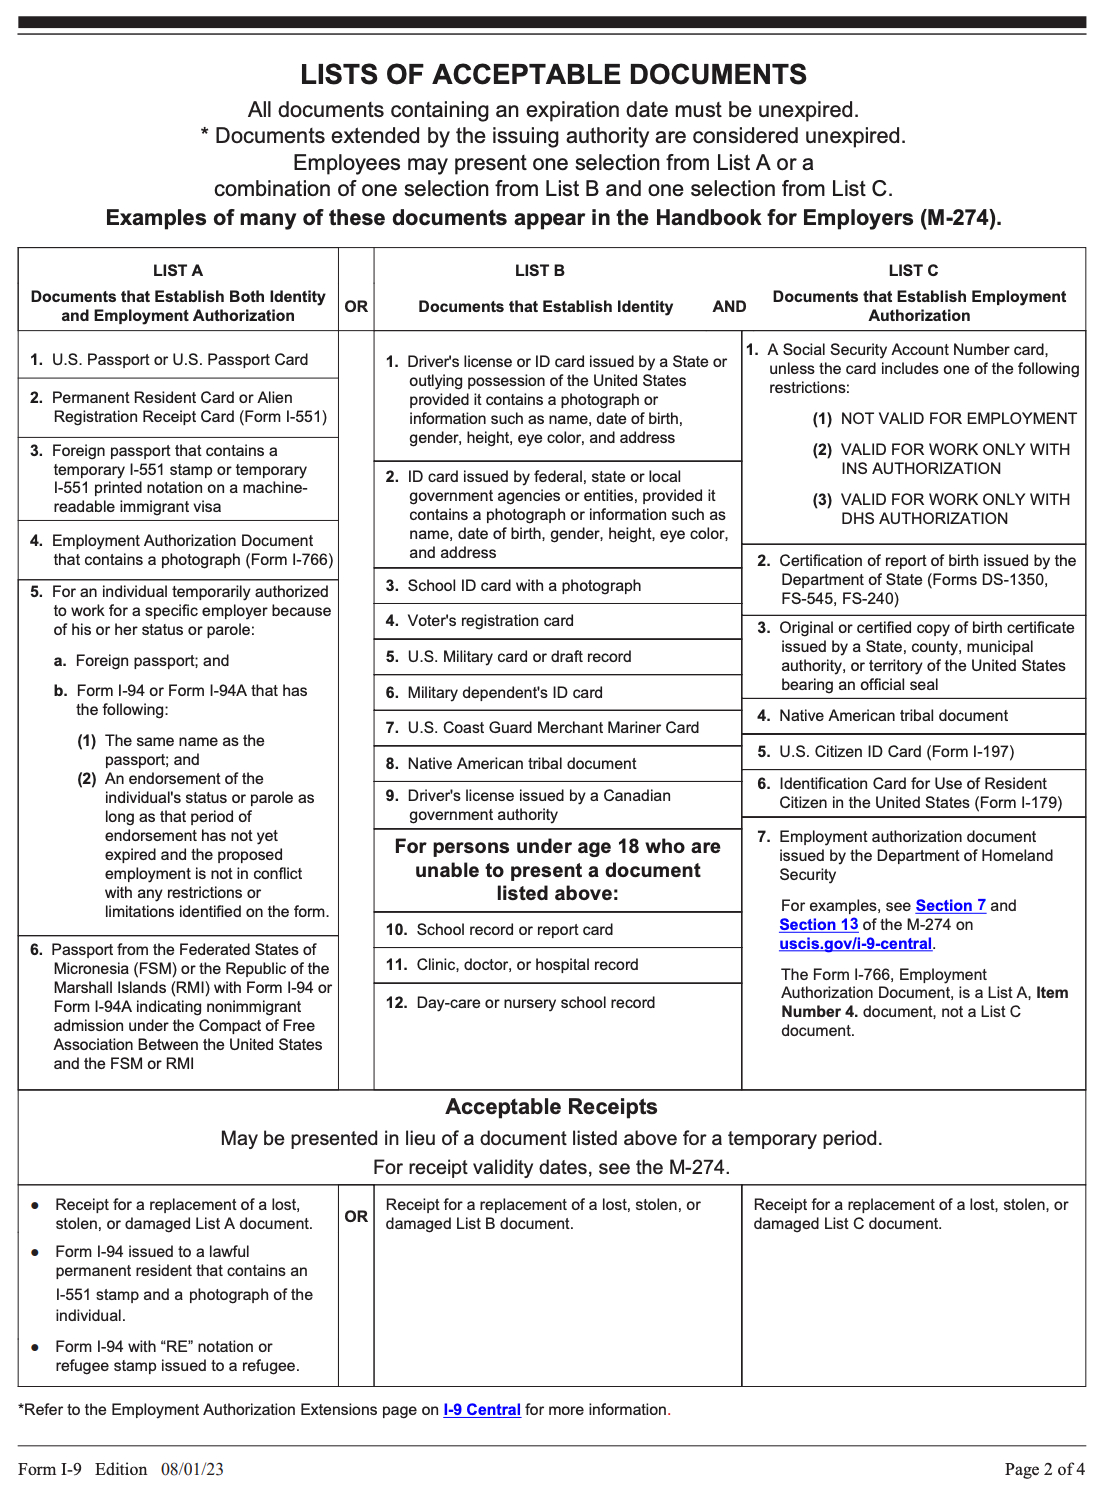 Georgetown University I-9 Process | Human Resources | Georgetown inside I-9 Form Requirements